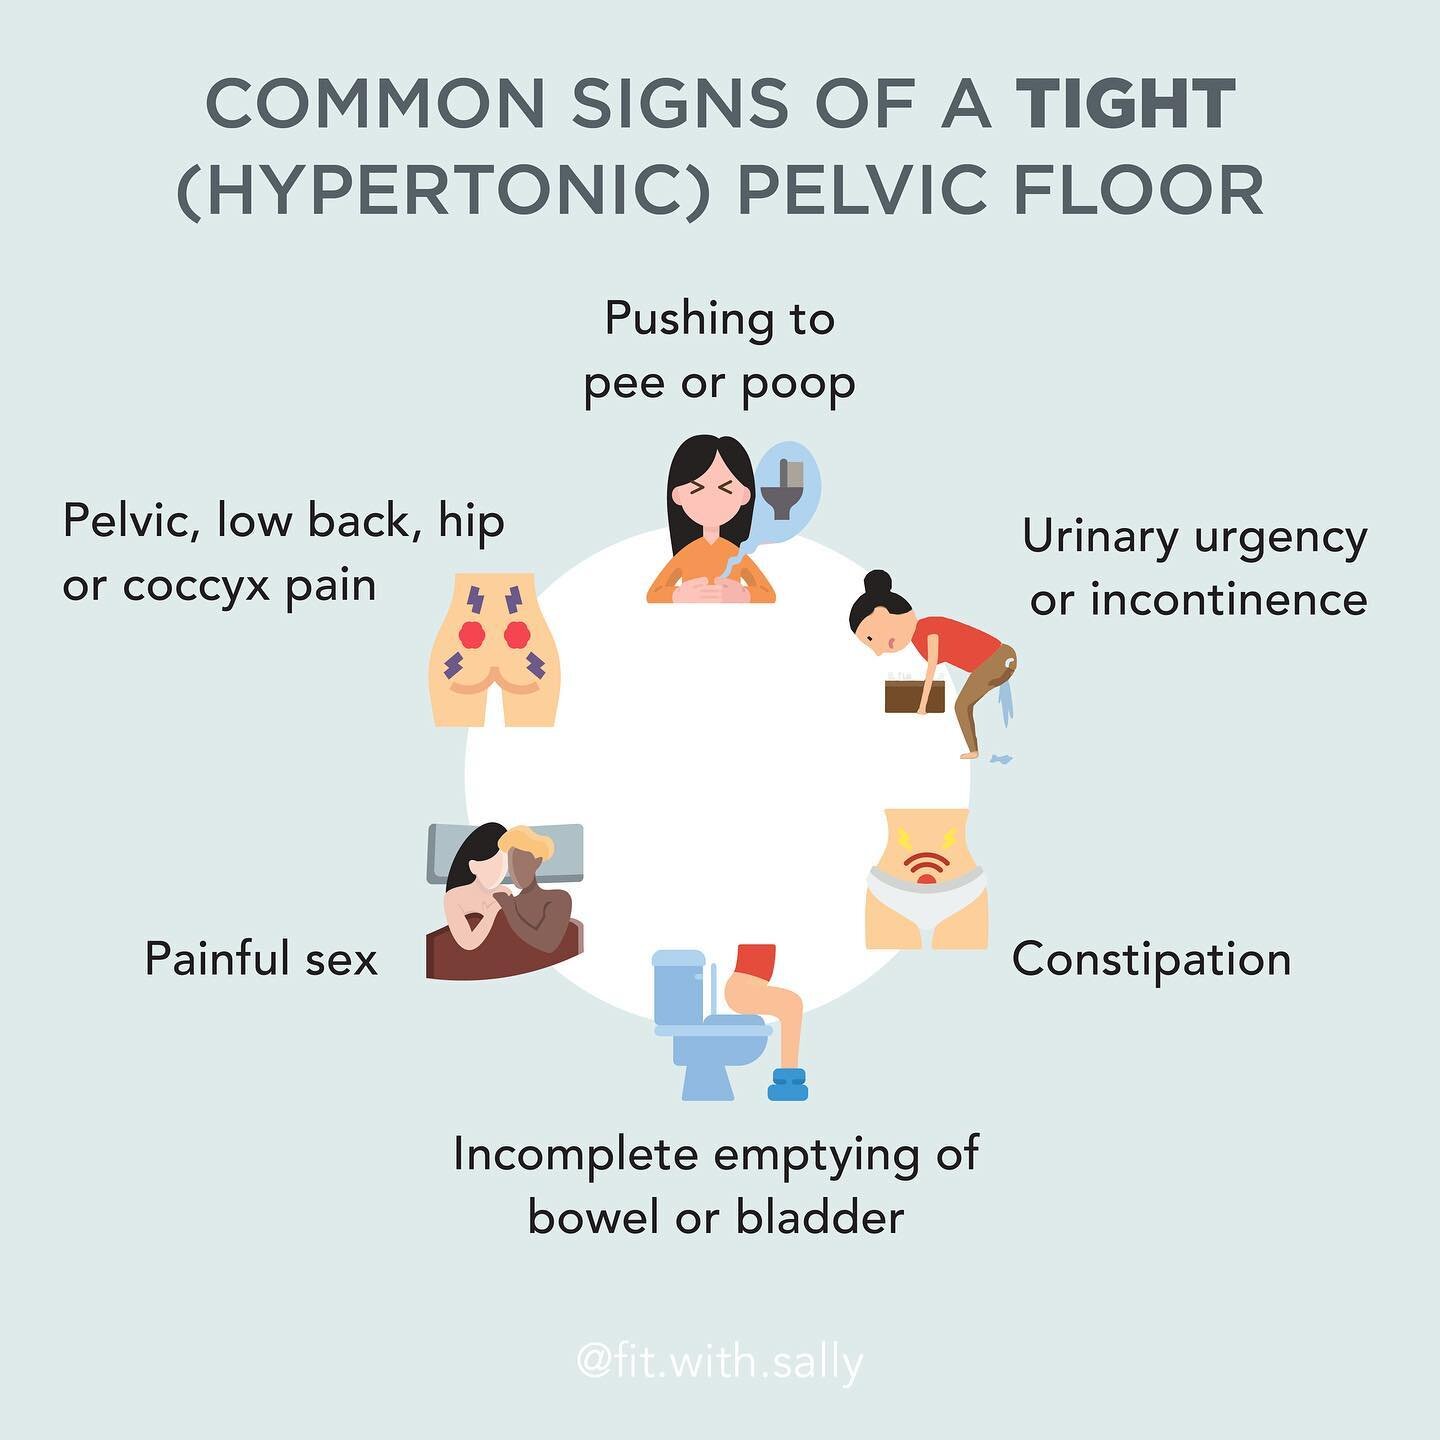 We talk a lot about pelvic floor weakness and how important it is to strengthen our pelvic floor. But what about pelvic floor tightness? Yes, there is such thing as having a too tight pelvic floor, called hypertonic pelvic floor. 
It is a very common